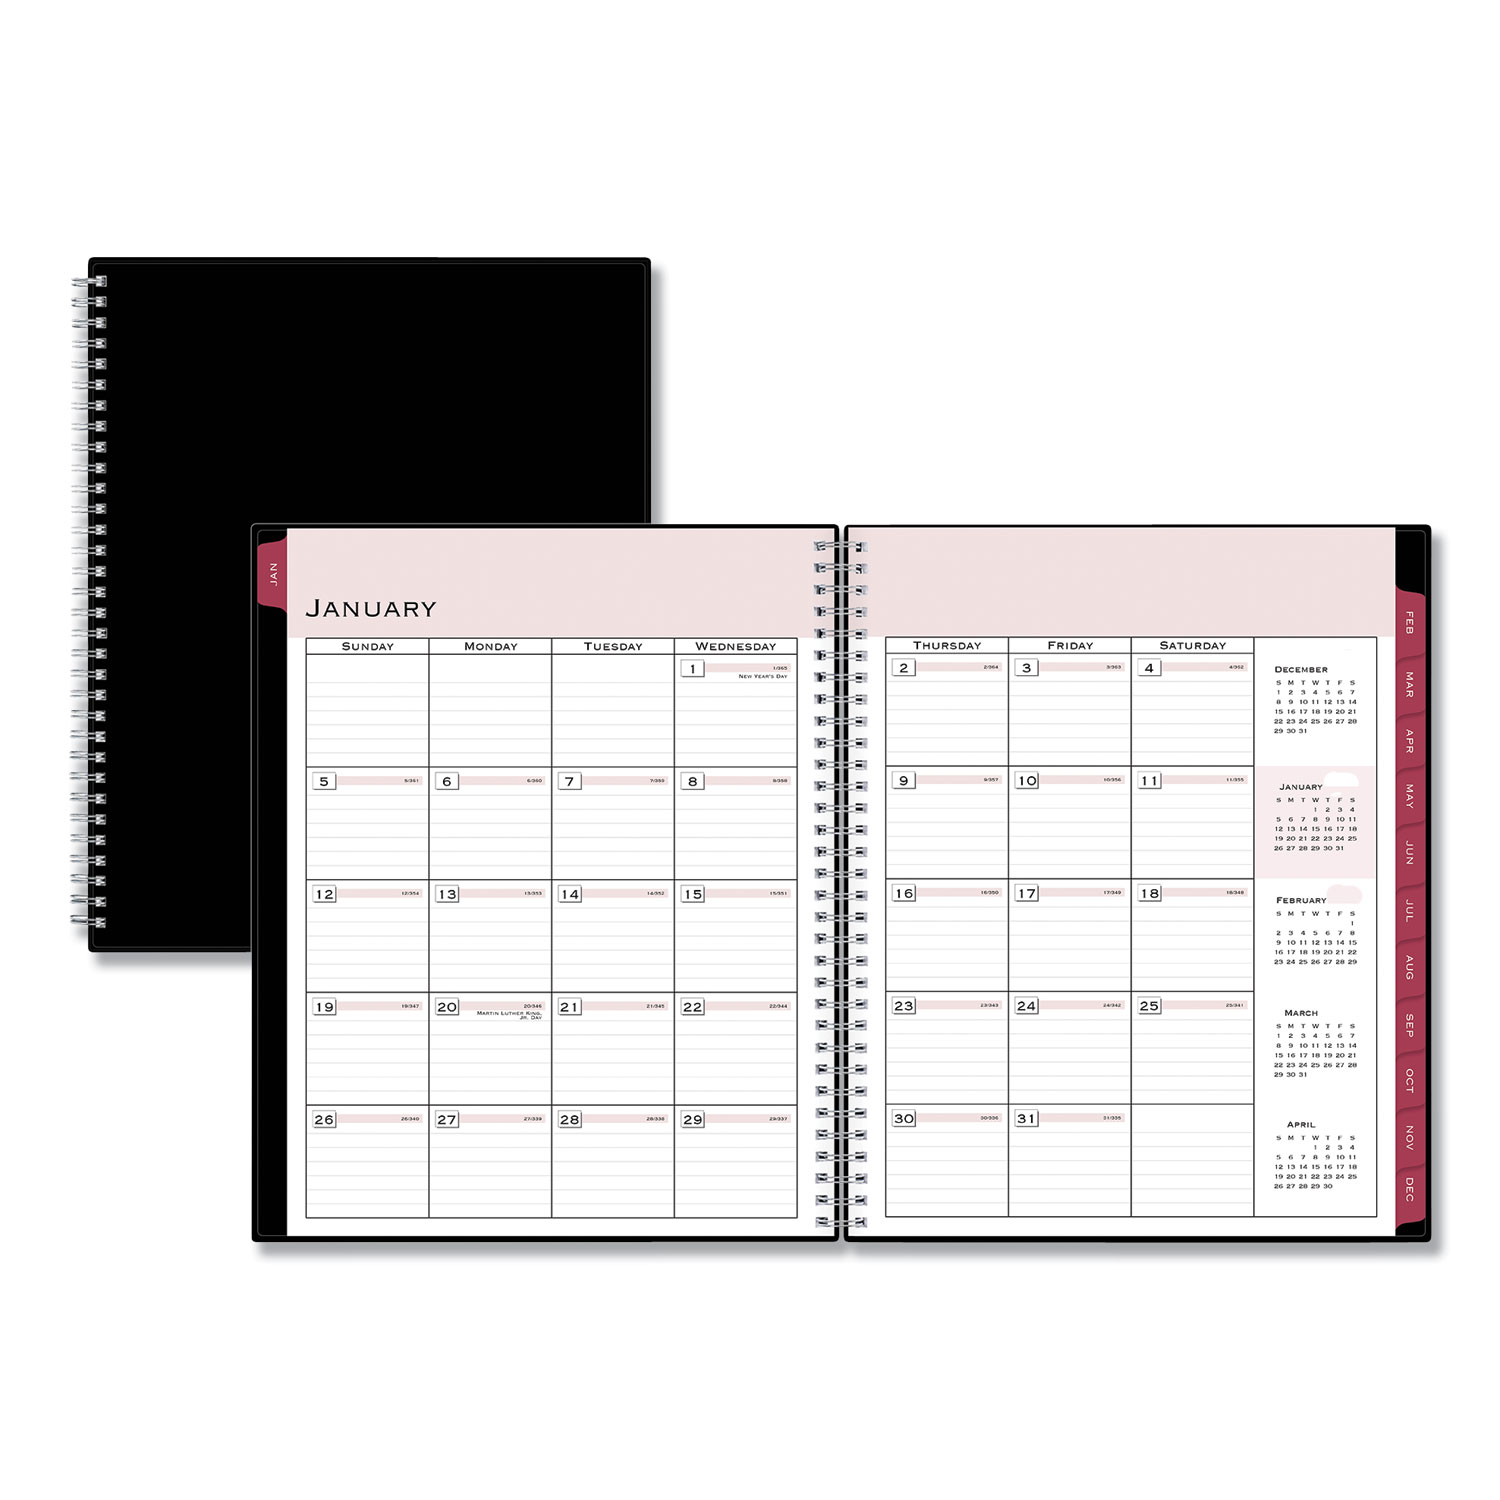  Blue Sky 111289 Classic Red Weekly/Monthly Appointment Book, 15-Min Time Slots (Mon-Sun), 11 x 8 1/2, Black Cover, 2020 (BLS111289) 